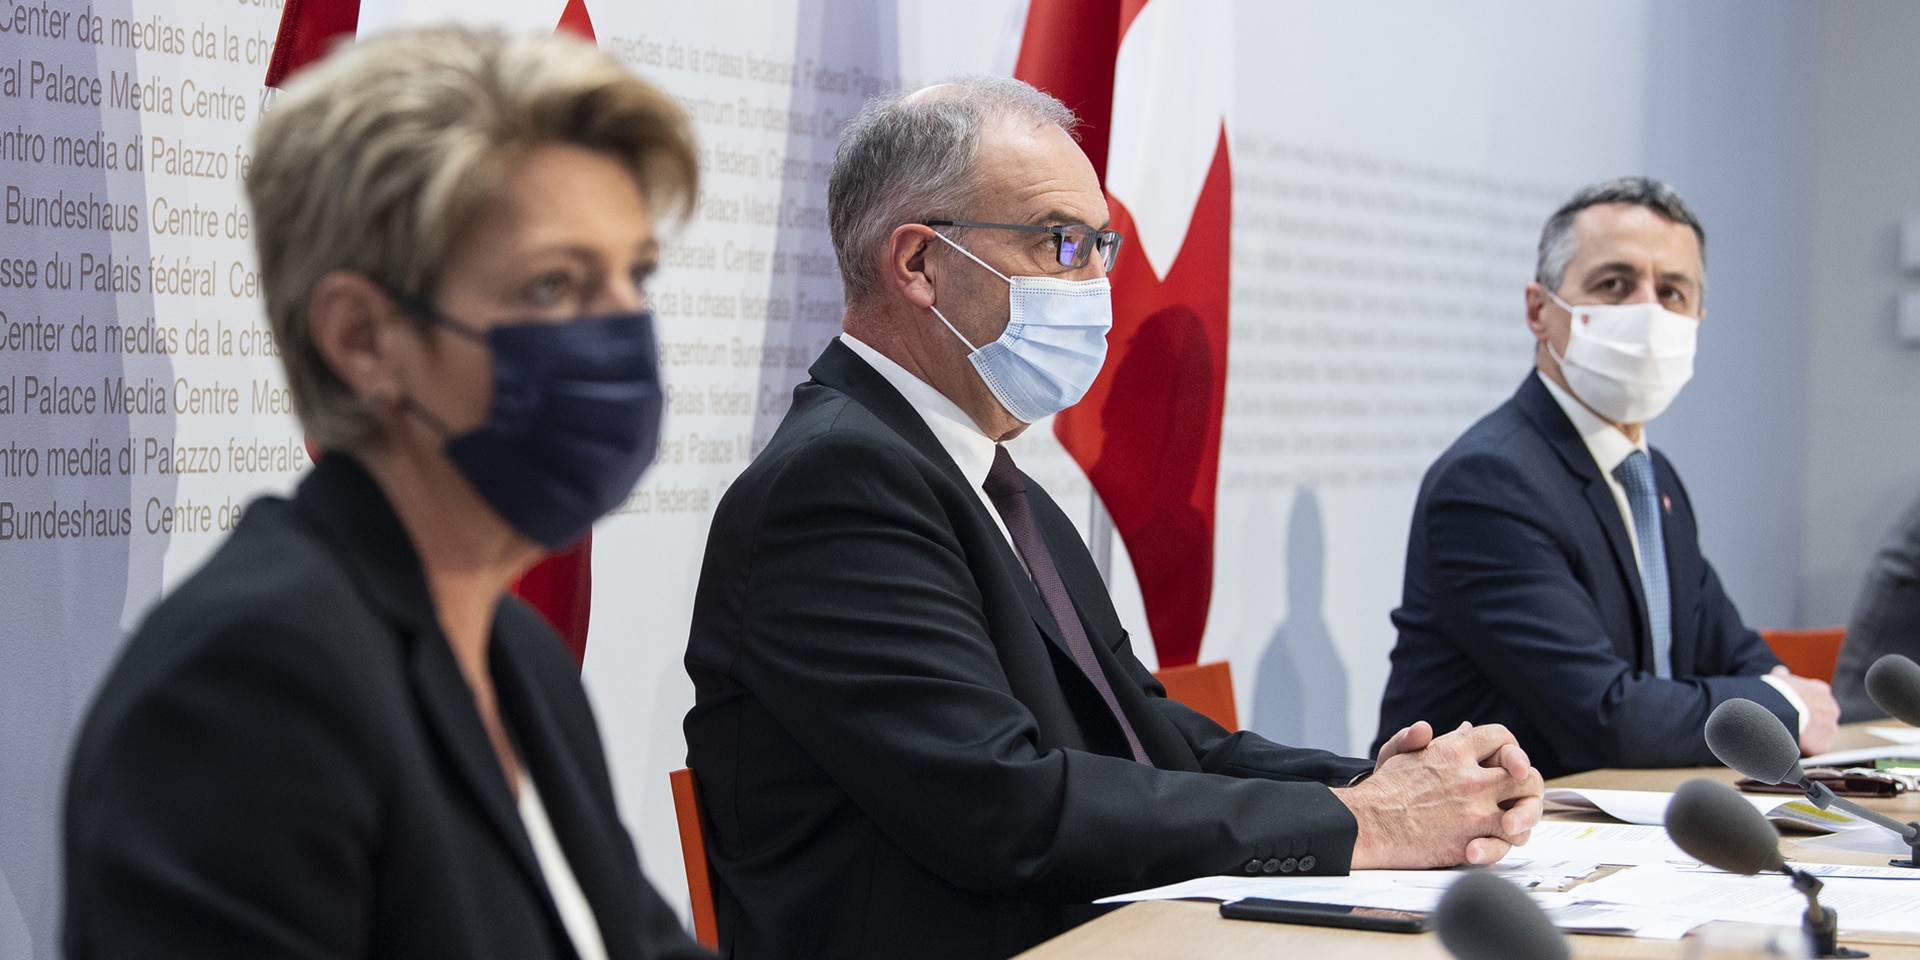  President of the Swiss Confederation Guy Parmelin, Federal Councillor Ignazio Cassis and Federal Councillor Karin Keller-Sutter speaking on the panel of a press briefing at the Media Centre in Berne.